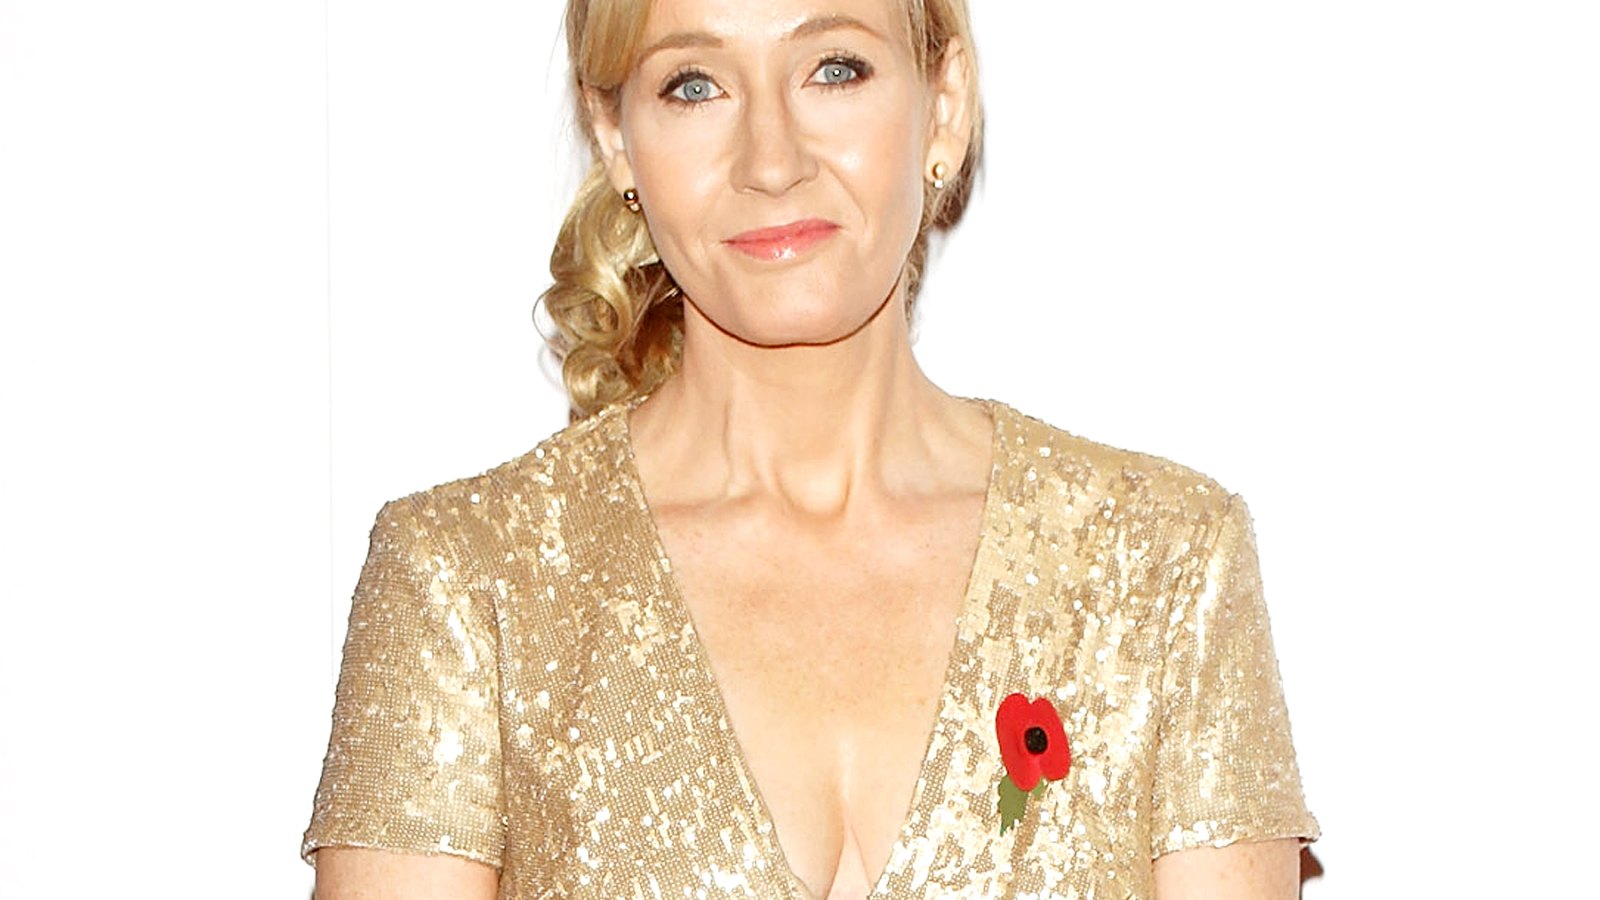 J.K. Rowling attends an event on November 9, 2013